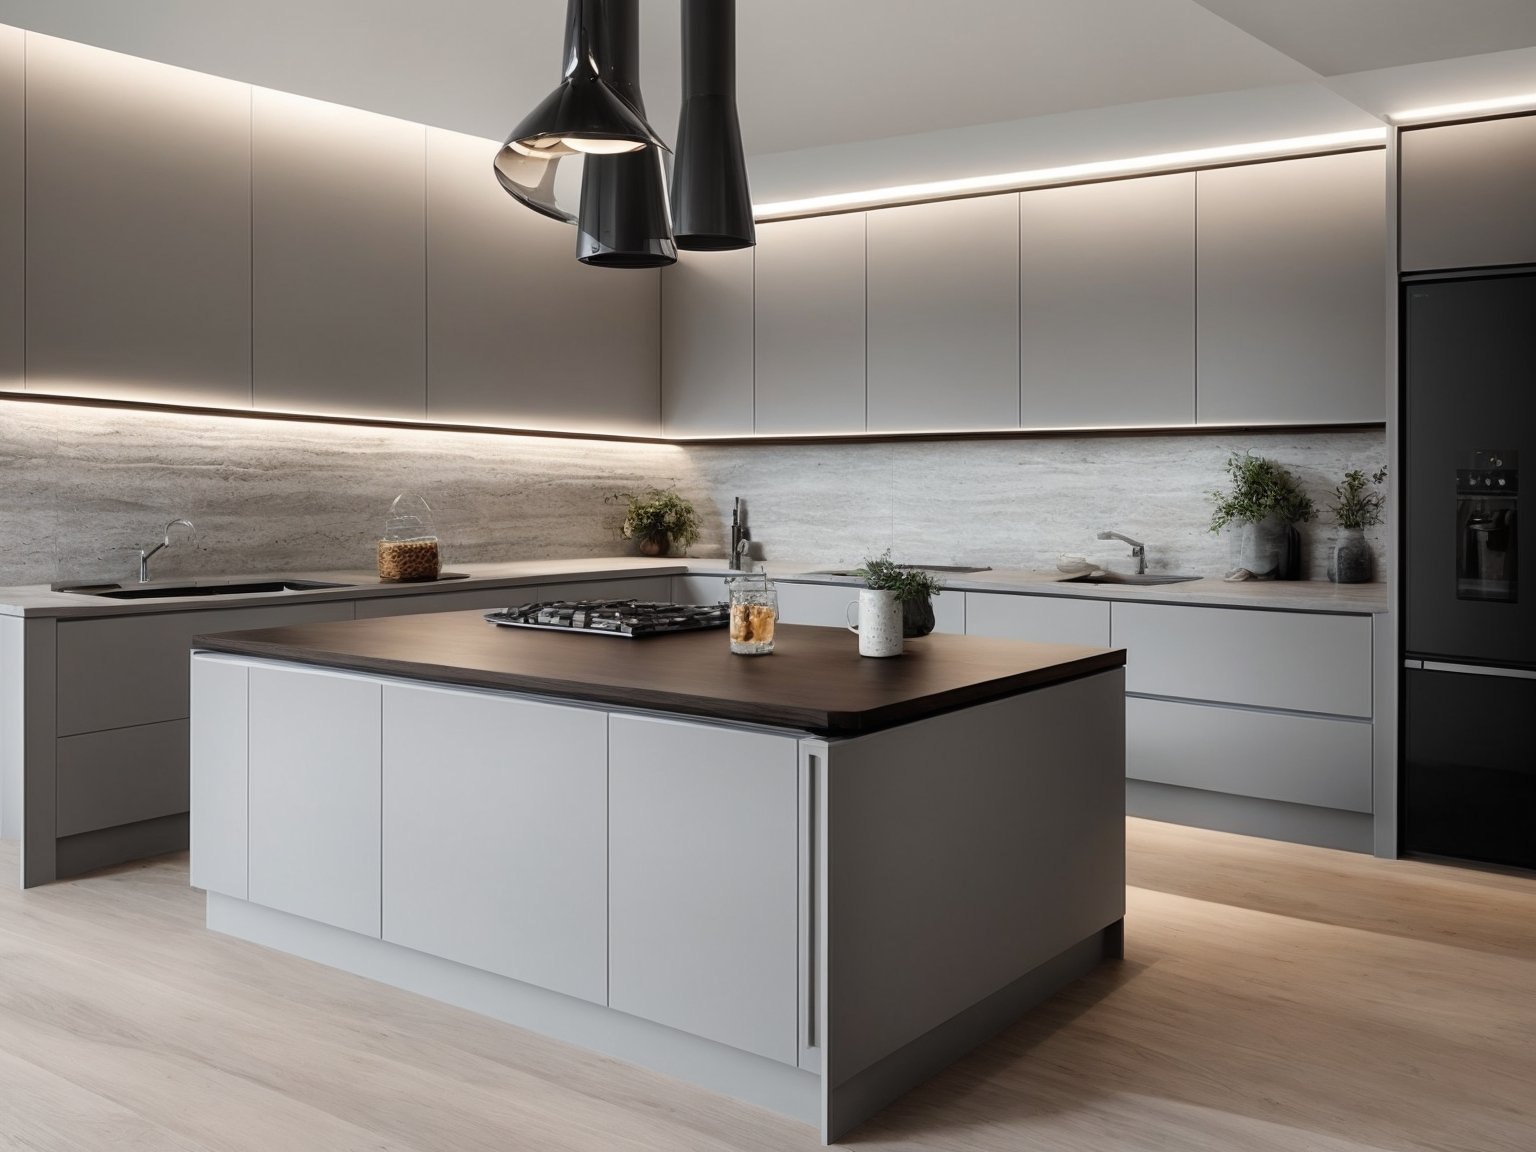 A sleek, modern kitchen with dove grey cabinets and dark countertops